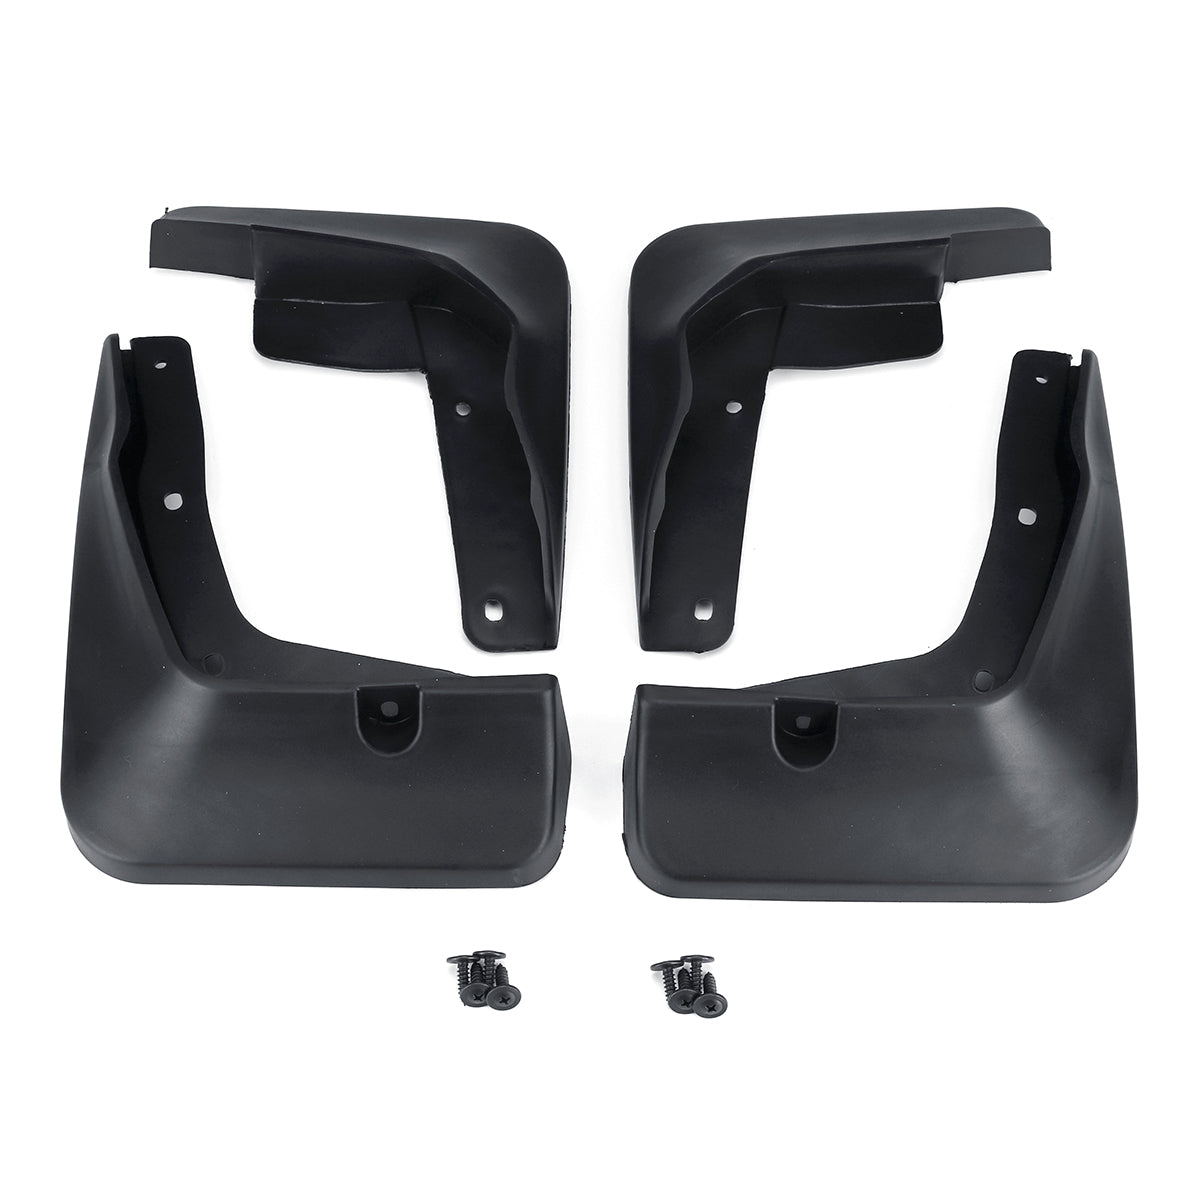 Oshotto Mud Flap (O.E.M Type) For Volkswagen Polo 2020 (T-III) (Set of 4), Black